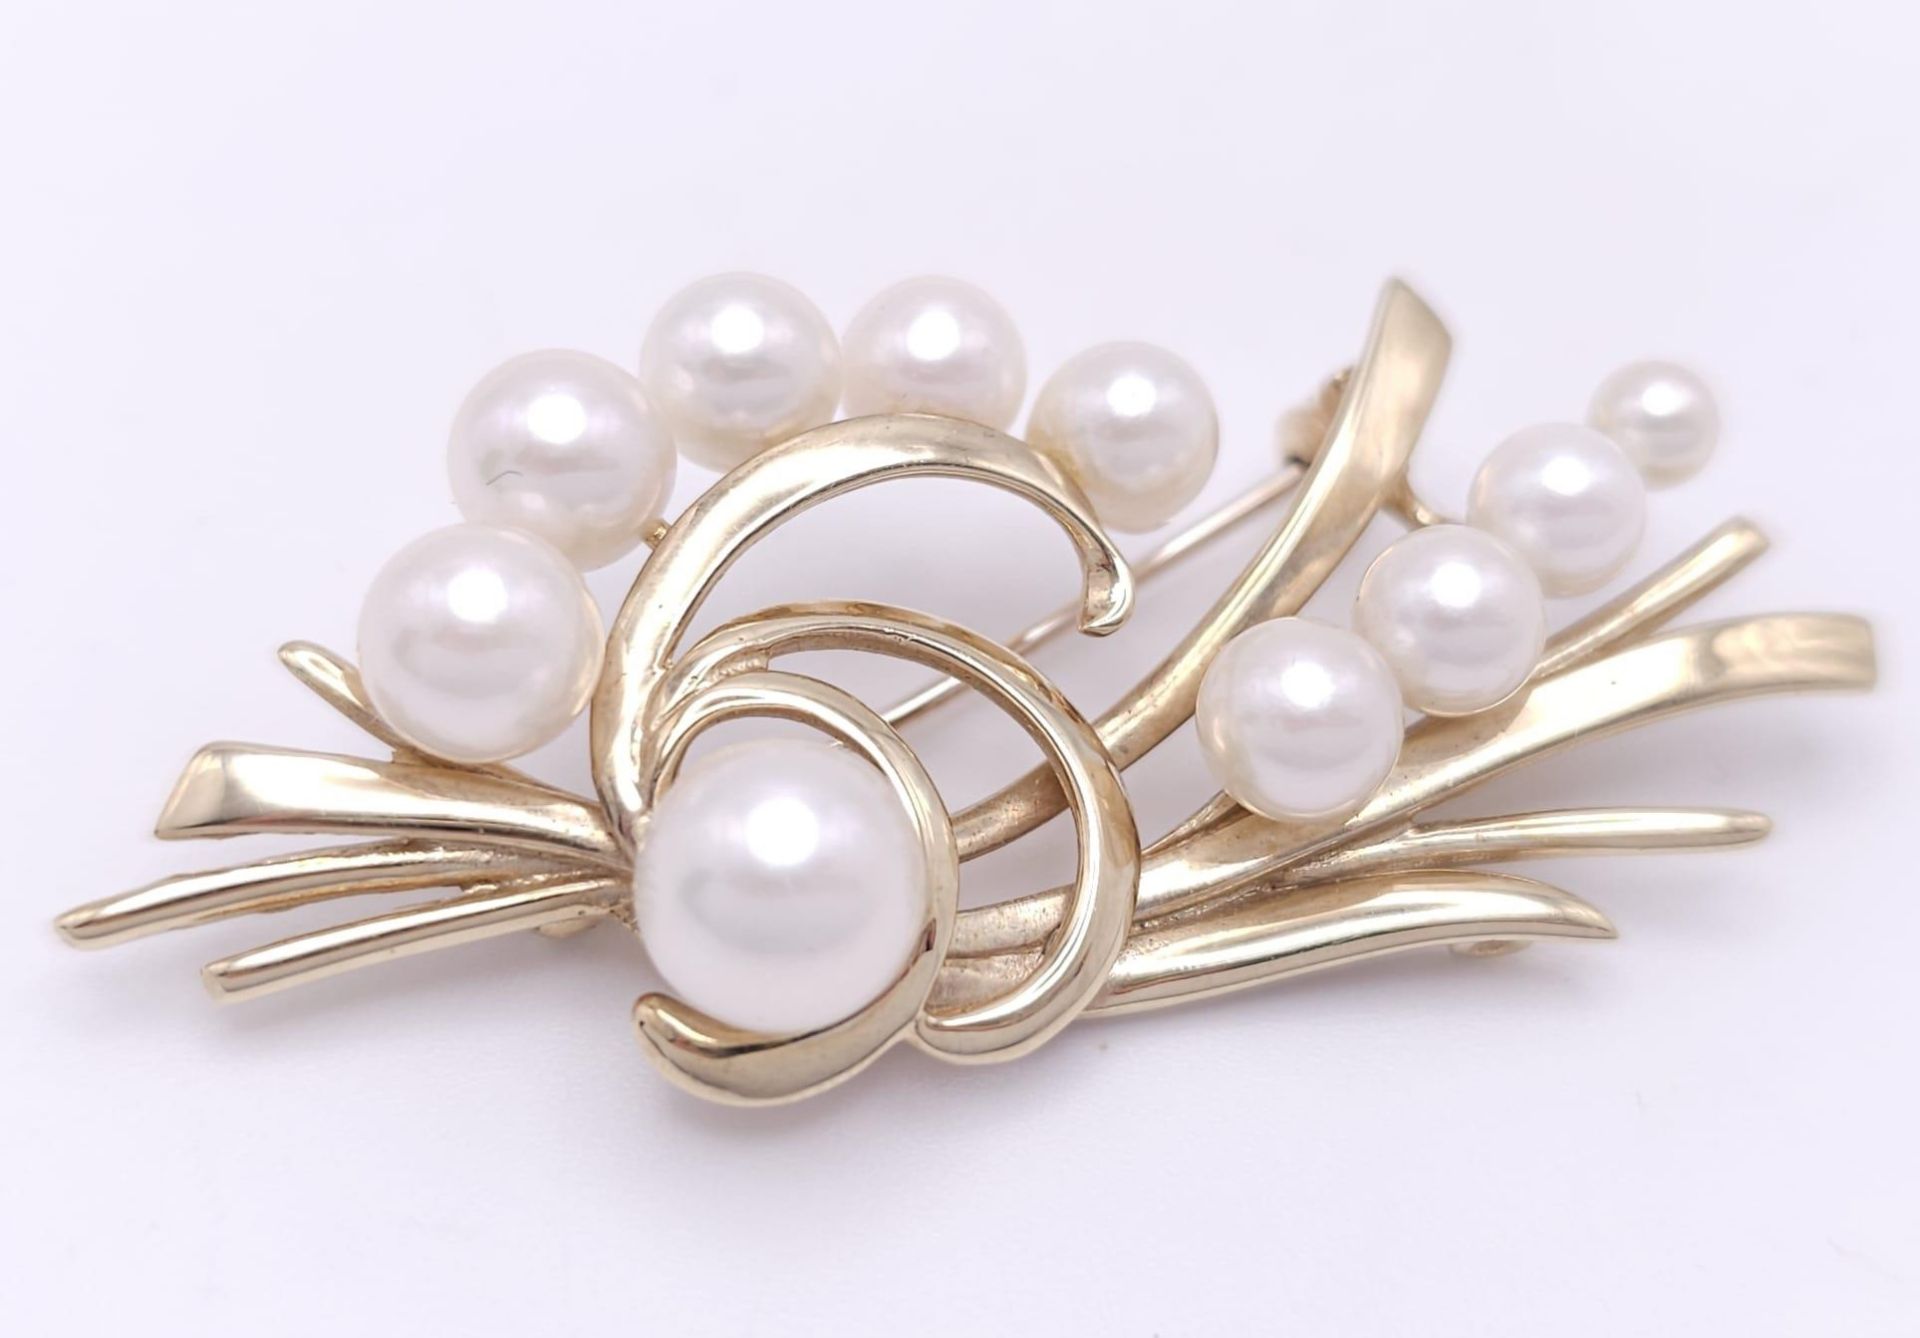 A 9k Yellow Gold and Pearl Decorative Floral Brooch. 5cm. 8g weight - Image 10 of 23